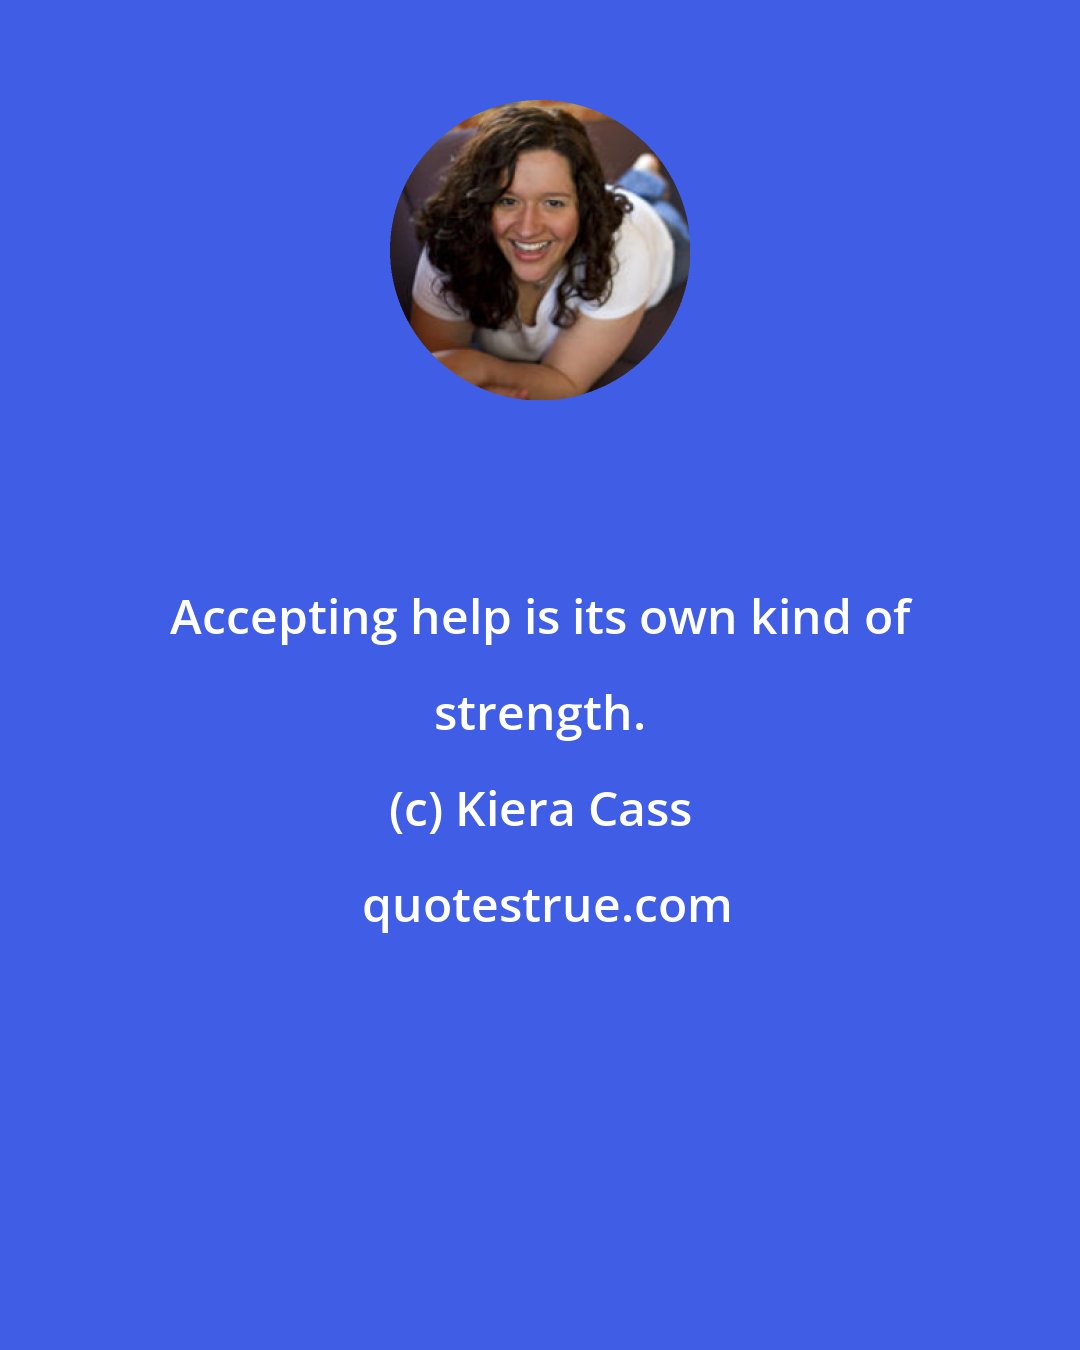 Kiera Cass: Accepting help is its own kind of strength.